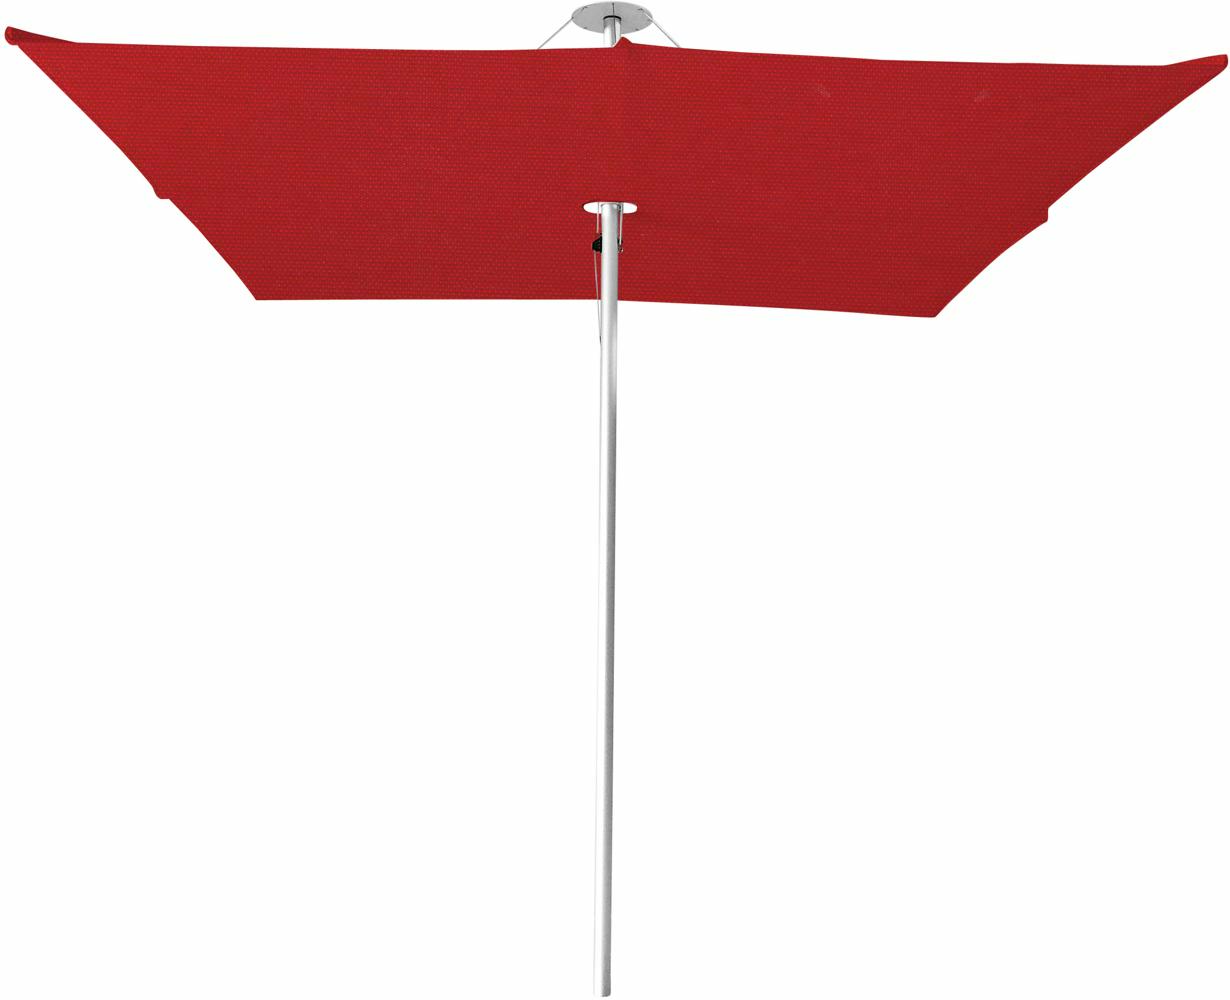 Infina center post umbrella, 3 m square, with frame in Aluminum and Colorum Pepper canopy.